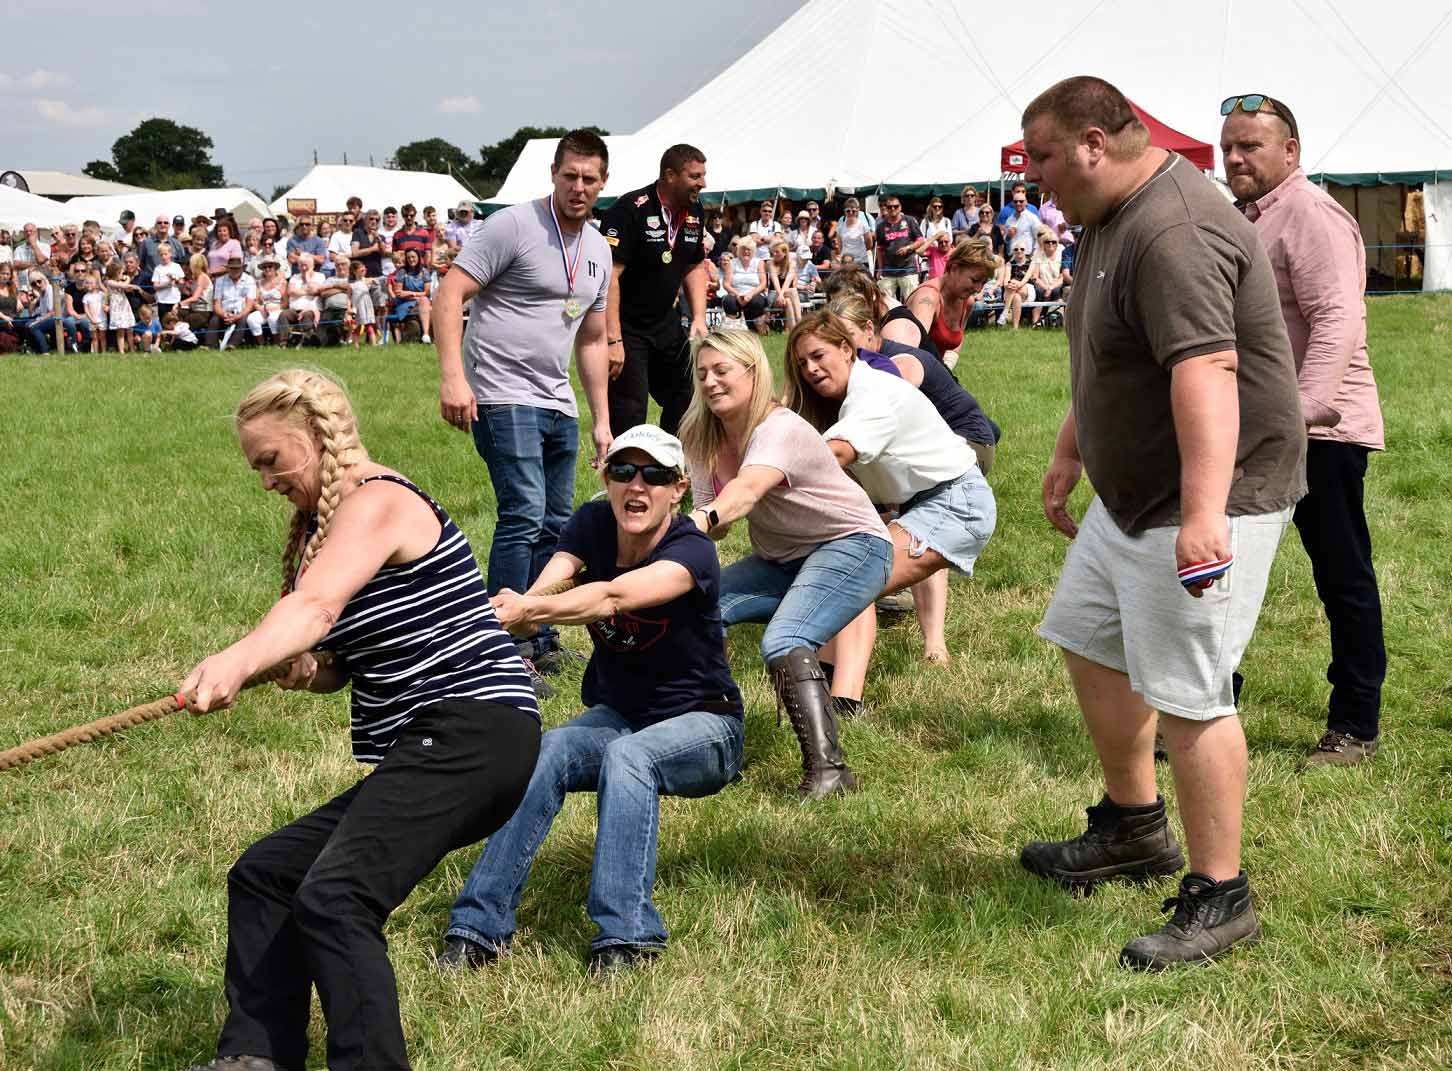 The Boot & Shoe ladies’ team in action in the popular tug-o-war competition at Tockwith Show